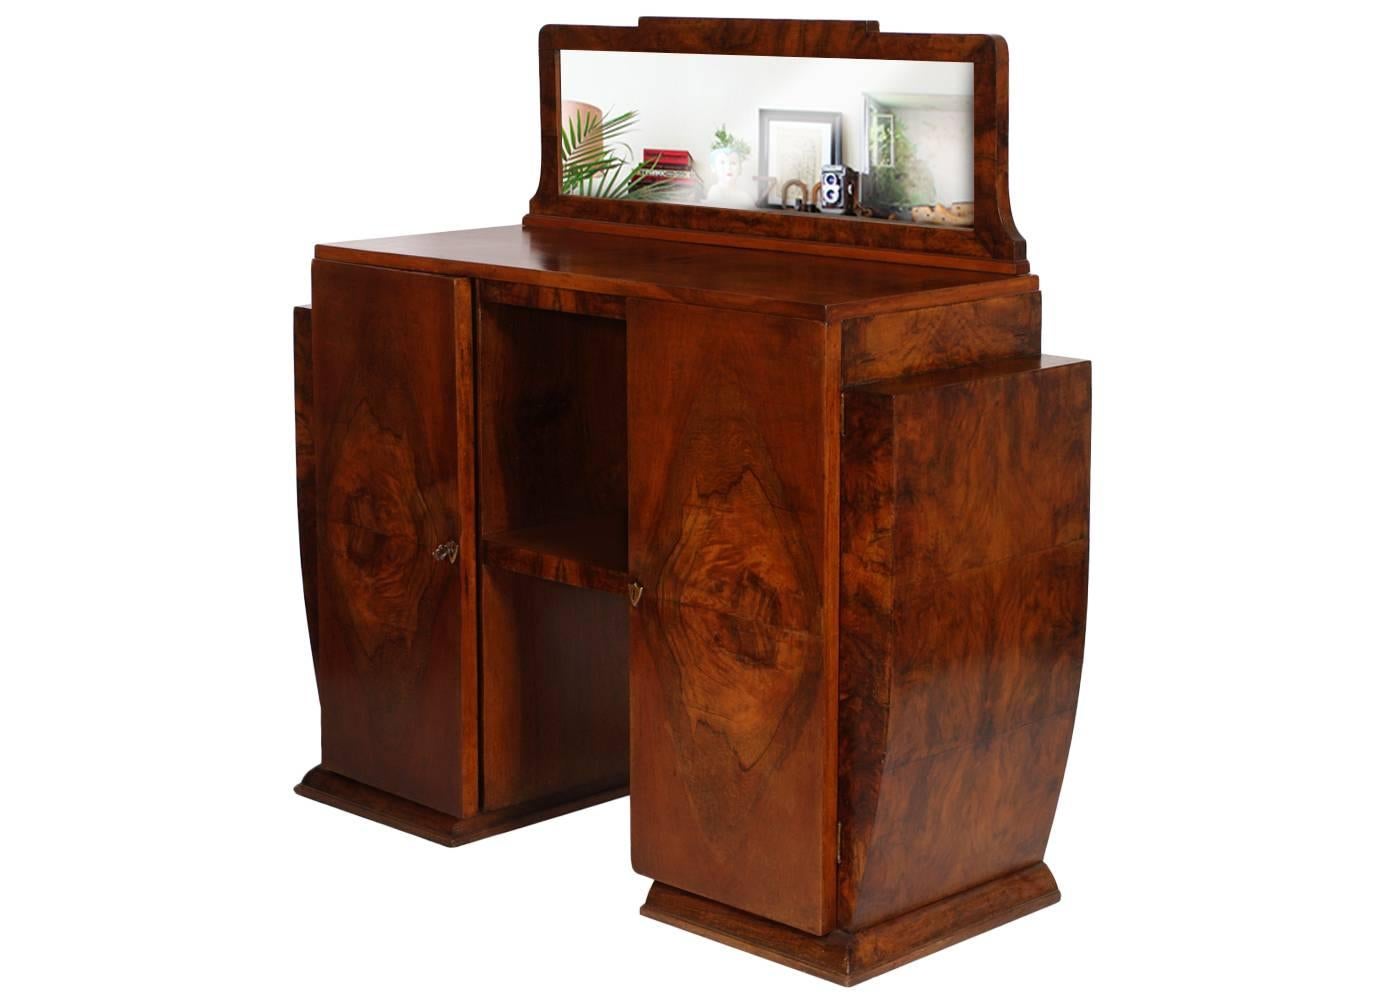 Code: FP07
Sculptural All original Art Deco Gaetano or Osvaldo Borsani credenza , sideboard or console early 20th century in walnut and burr walnut. Small rectangular shaped mirror. Two doors with interior shelf. 
Restored and polished with wax.